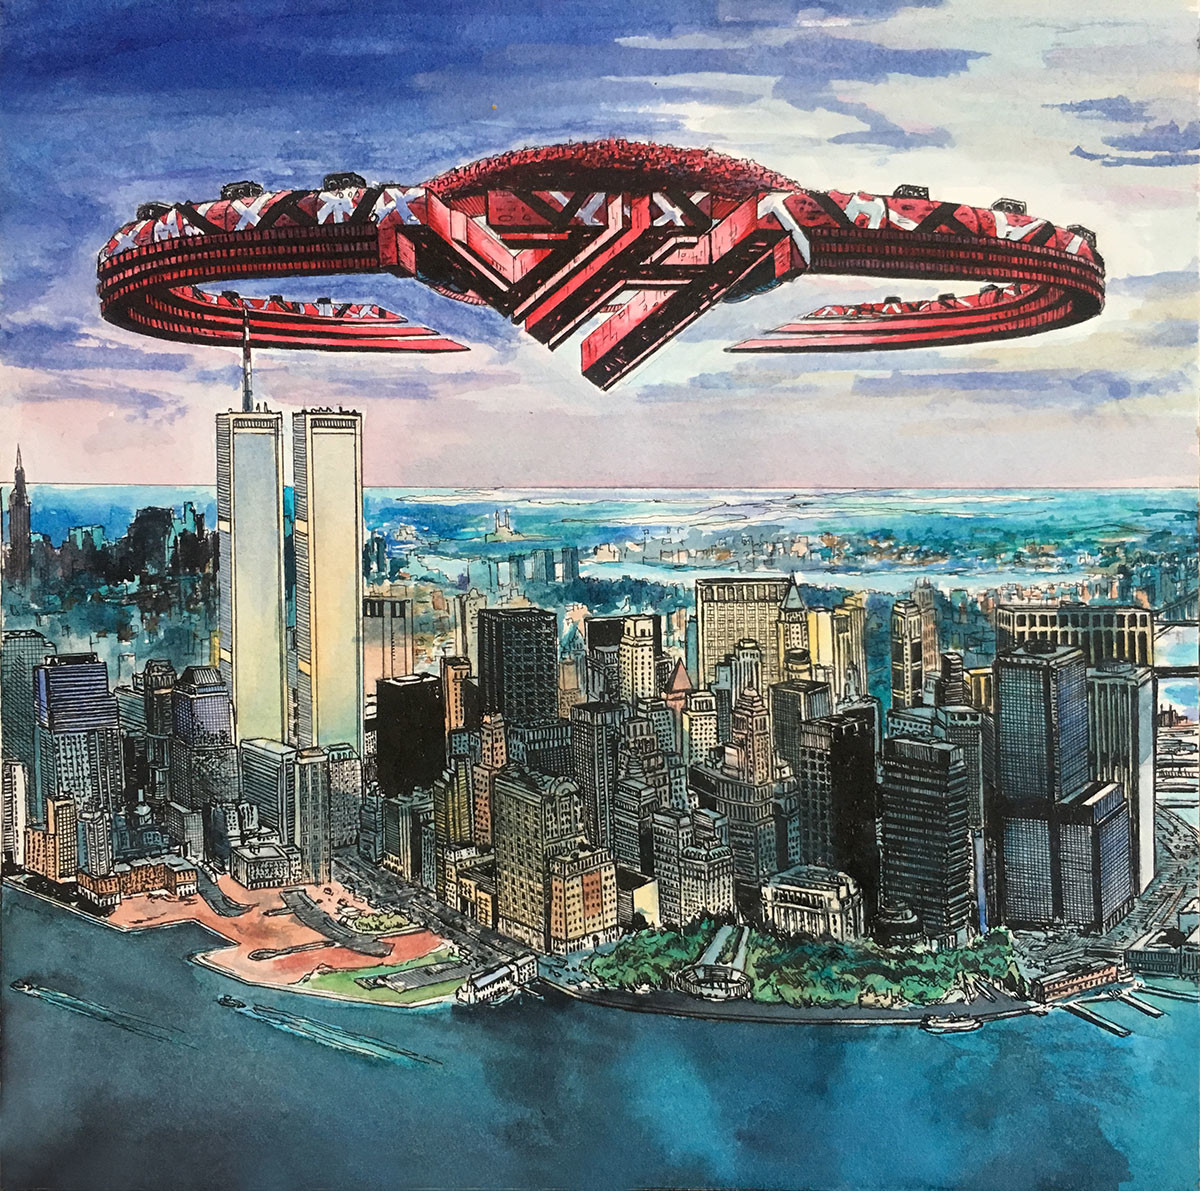 8" x 8' pen and ink colored with watercolor. This was a fun attempt to create album artwork for my favorite band, Van Halen. It was done before September 11th, 2001. I had mailed a copy to the band shortly before that and received a positive response. 